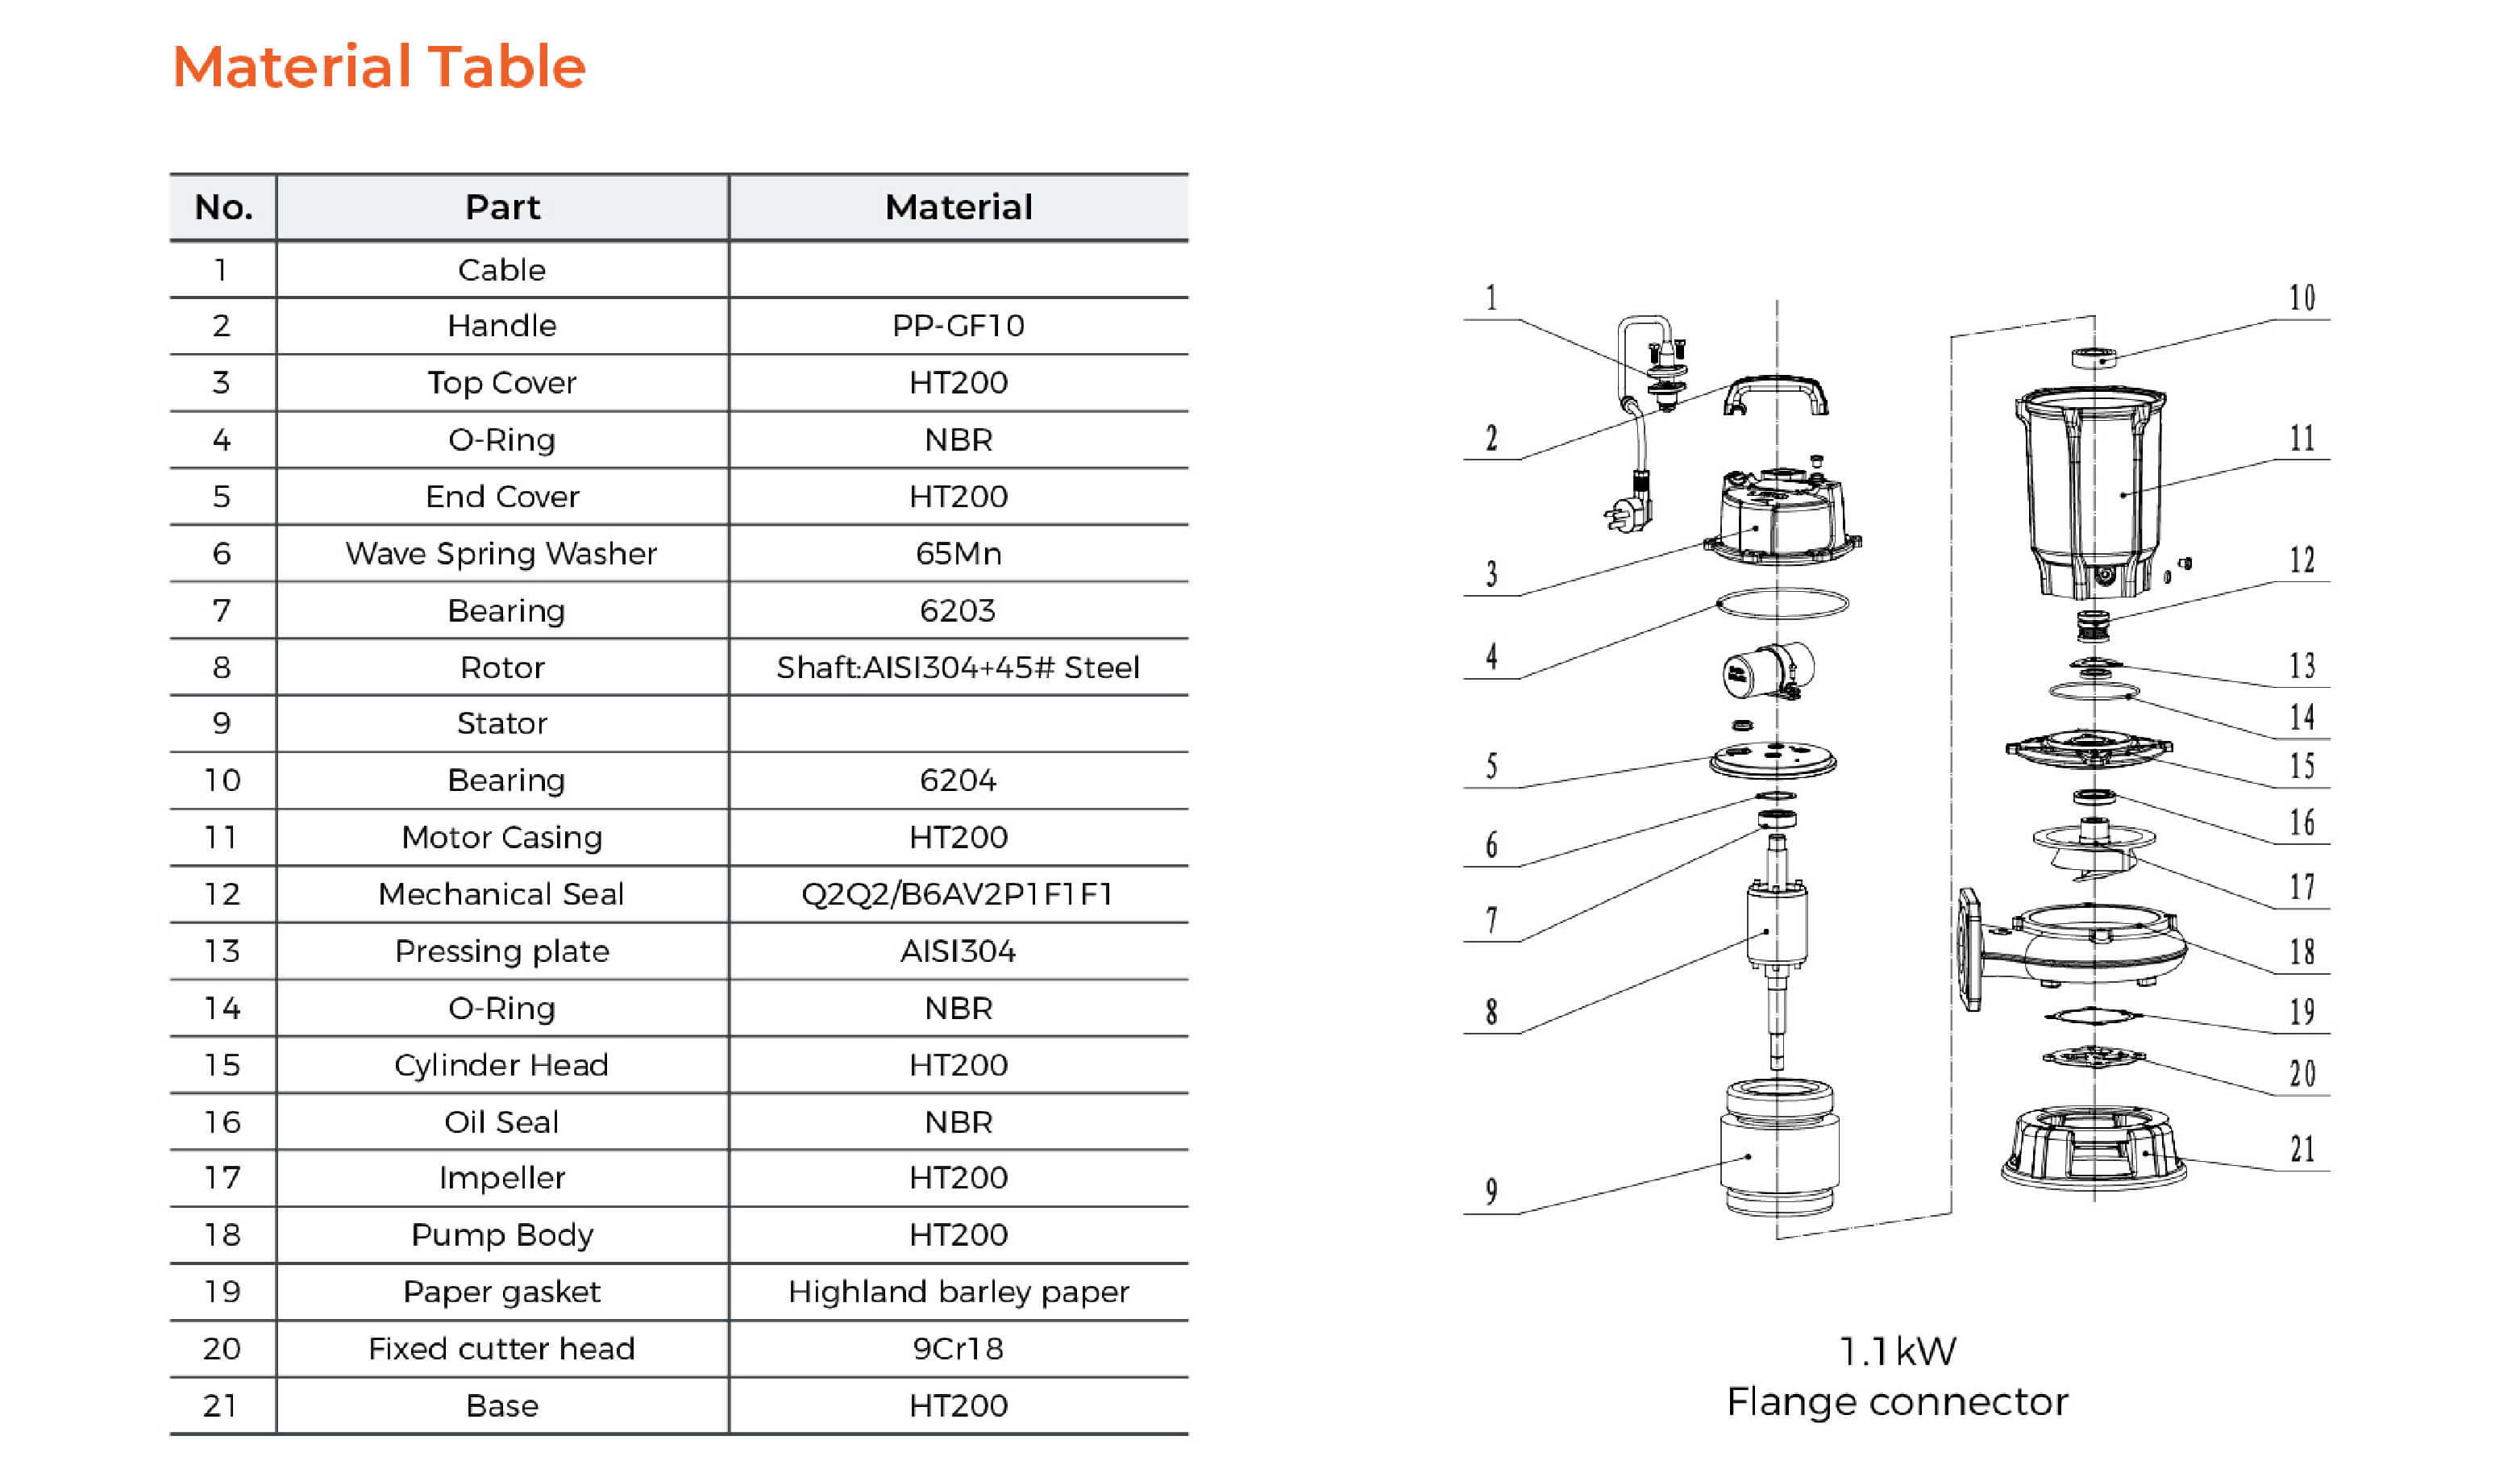 WQ-T Submersible Sewage Pump Material Table 1.1kw